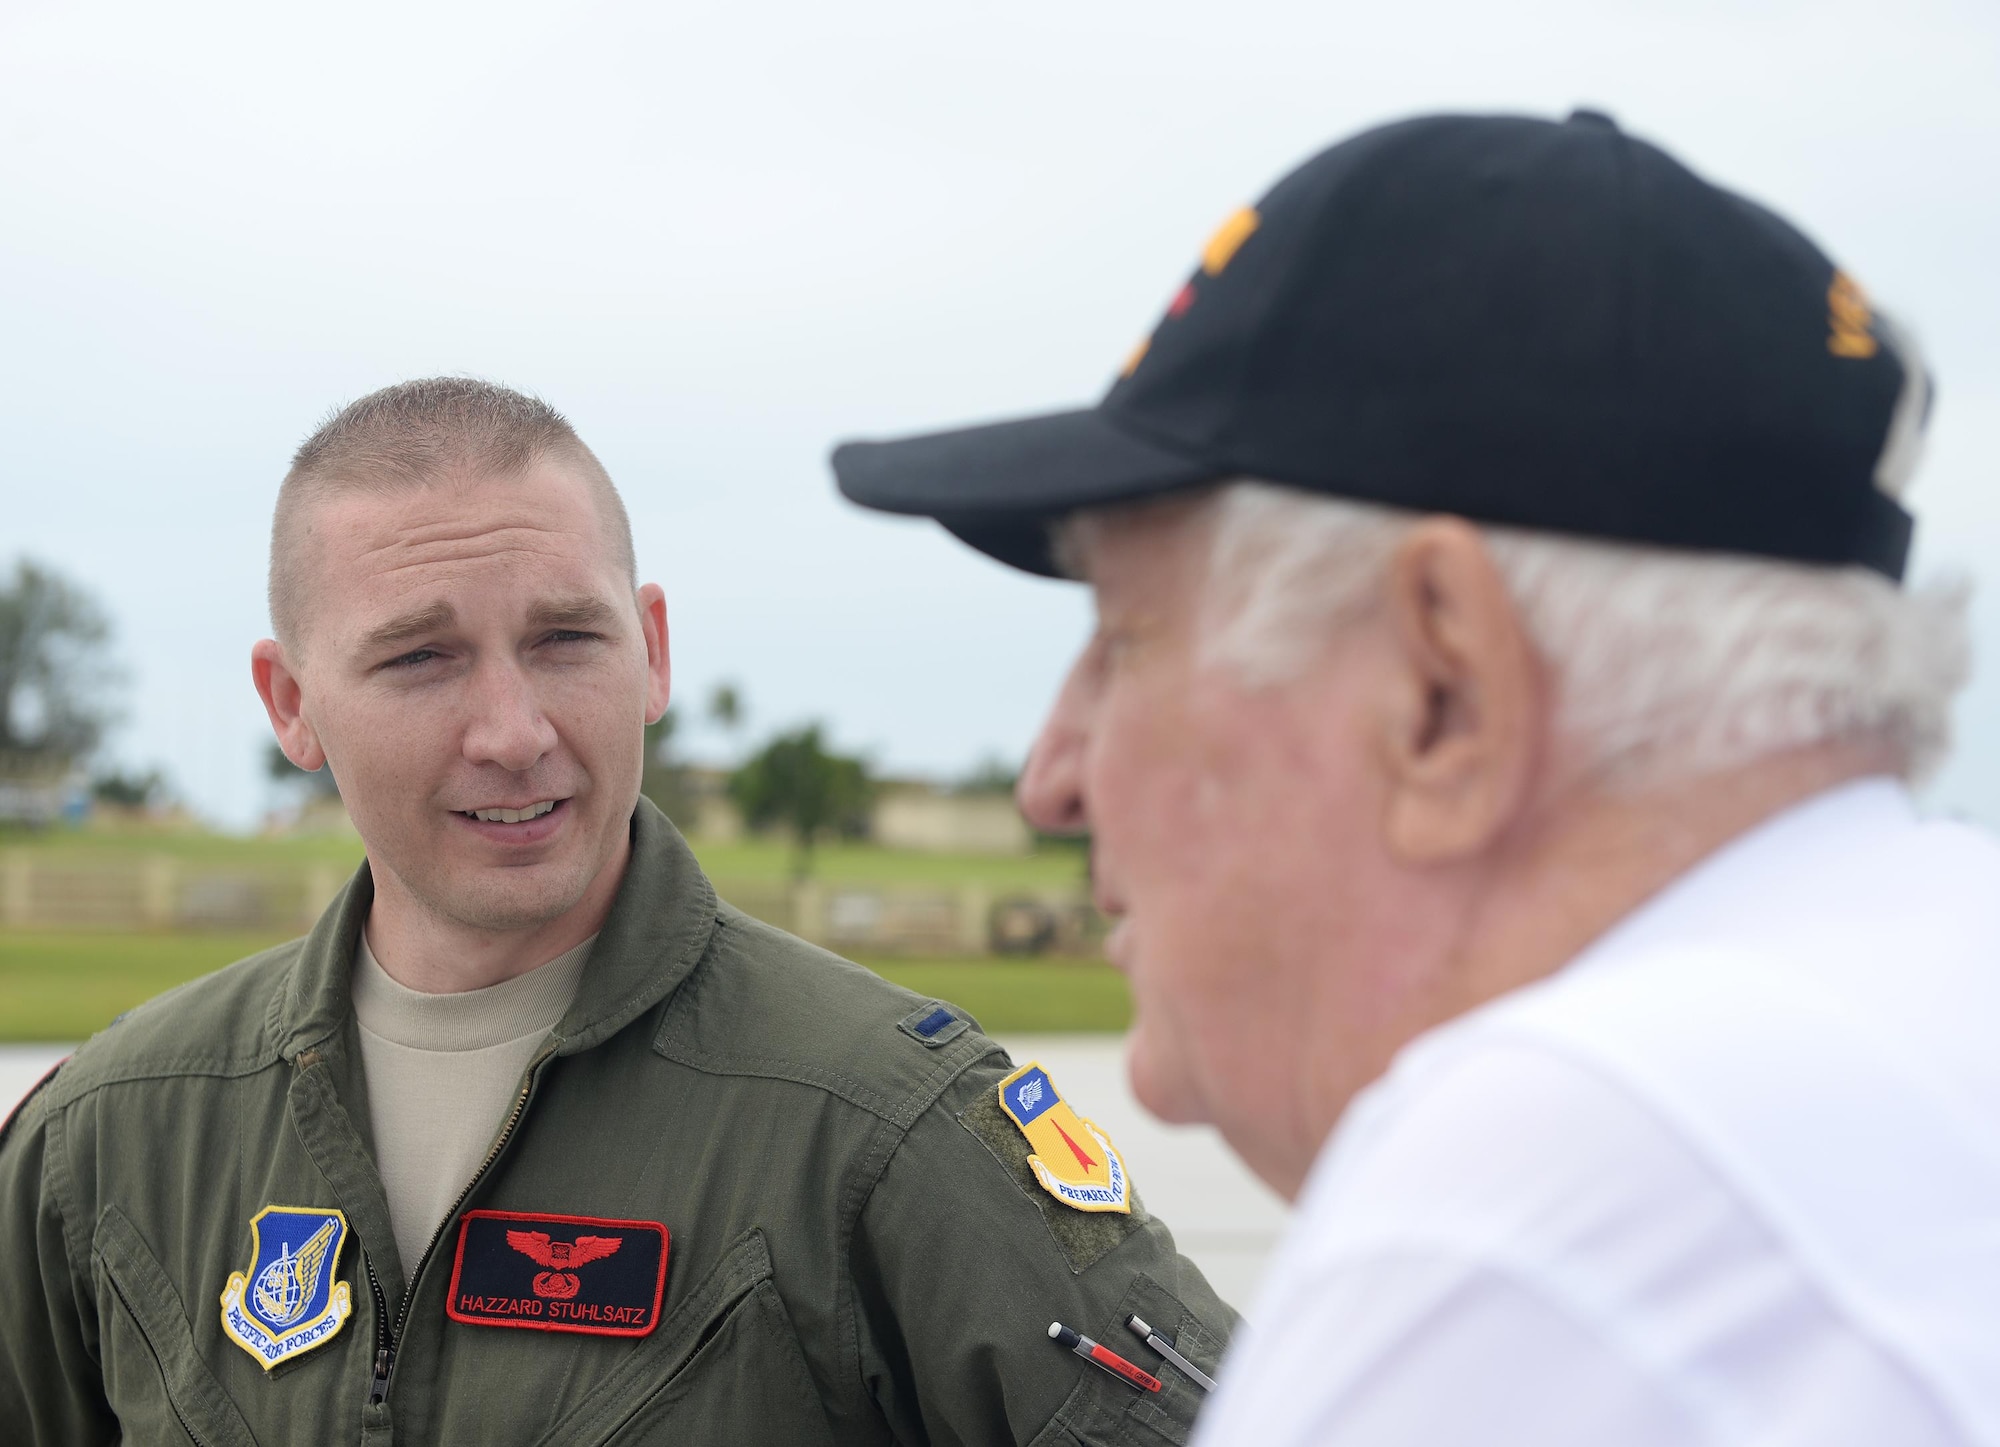 1st Lt. Dillen Stuhlsatz, a 34th Expeditionary Bomb Squadron weapons systems officer deployed from Ellsworth Air Force Base, S.D., shares a flying experience with World War II veteran Rowland Ball at Andersen Air Force Base, Guam, Aug. 16, 2016. Ball, who returned to Guam for the first time in 71 years, received the opportunity to tour Andersen AFB and shared stories with Airmen about the challenges he faced during World War II. (U.S. Air Force photo by Staff Sgt. Benjamin Gonsier)